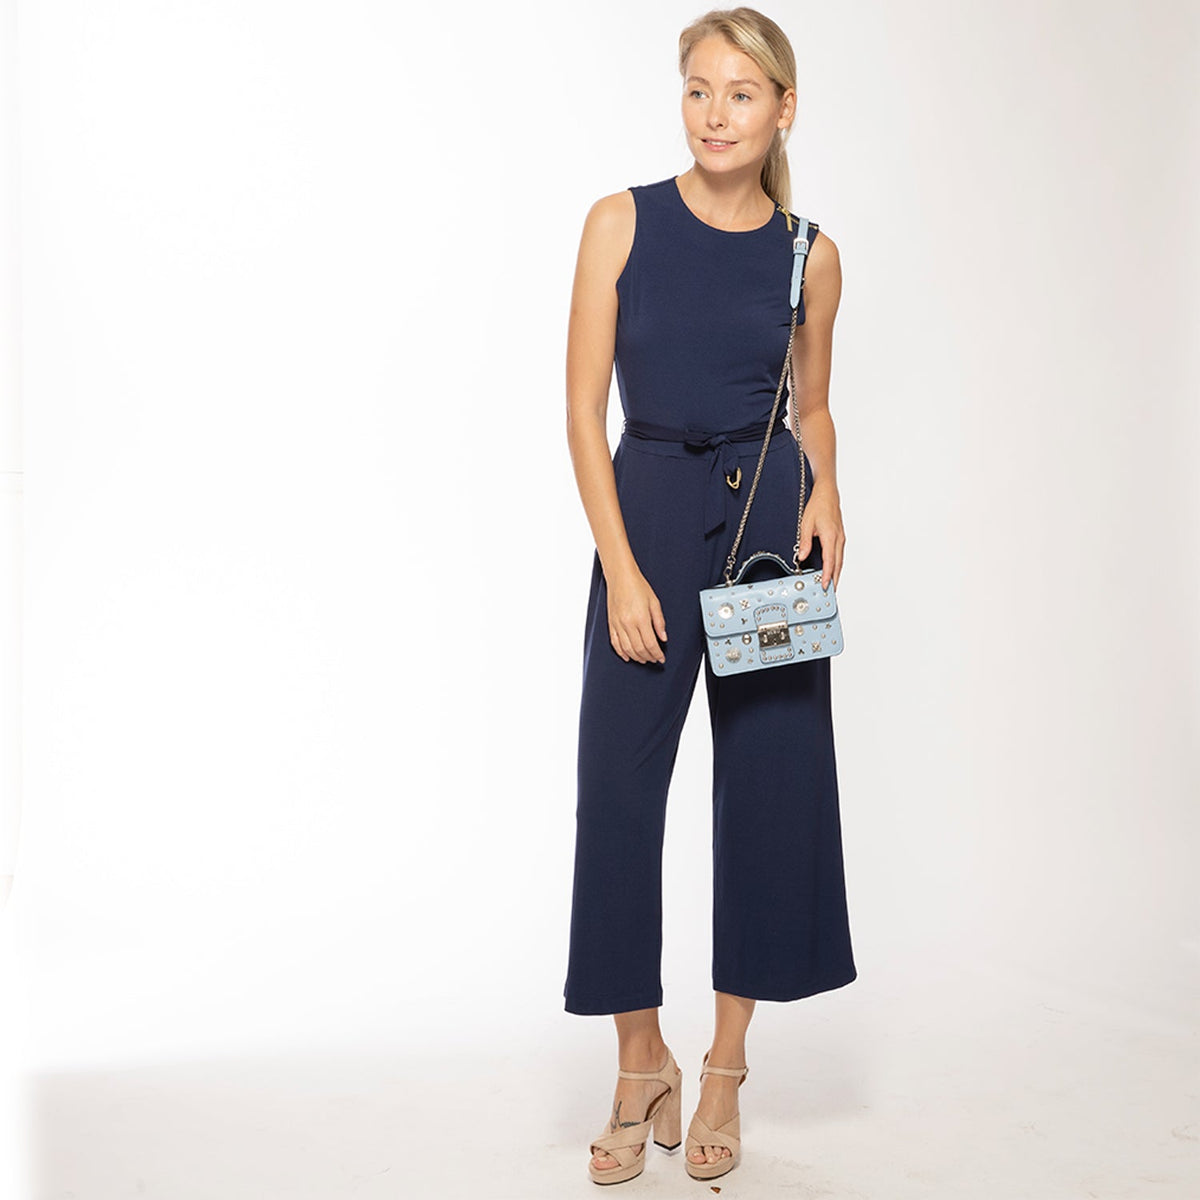 The Hollywood Light Blue Small Leather Bag - Premium Handbag from SUSU - Just $295! Shop now at Ida Louise Boutique